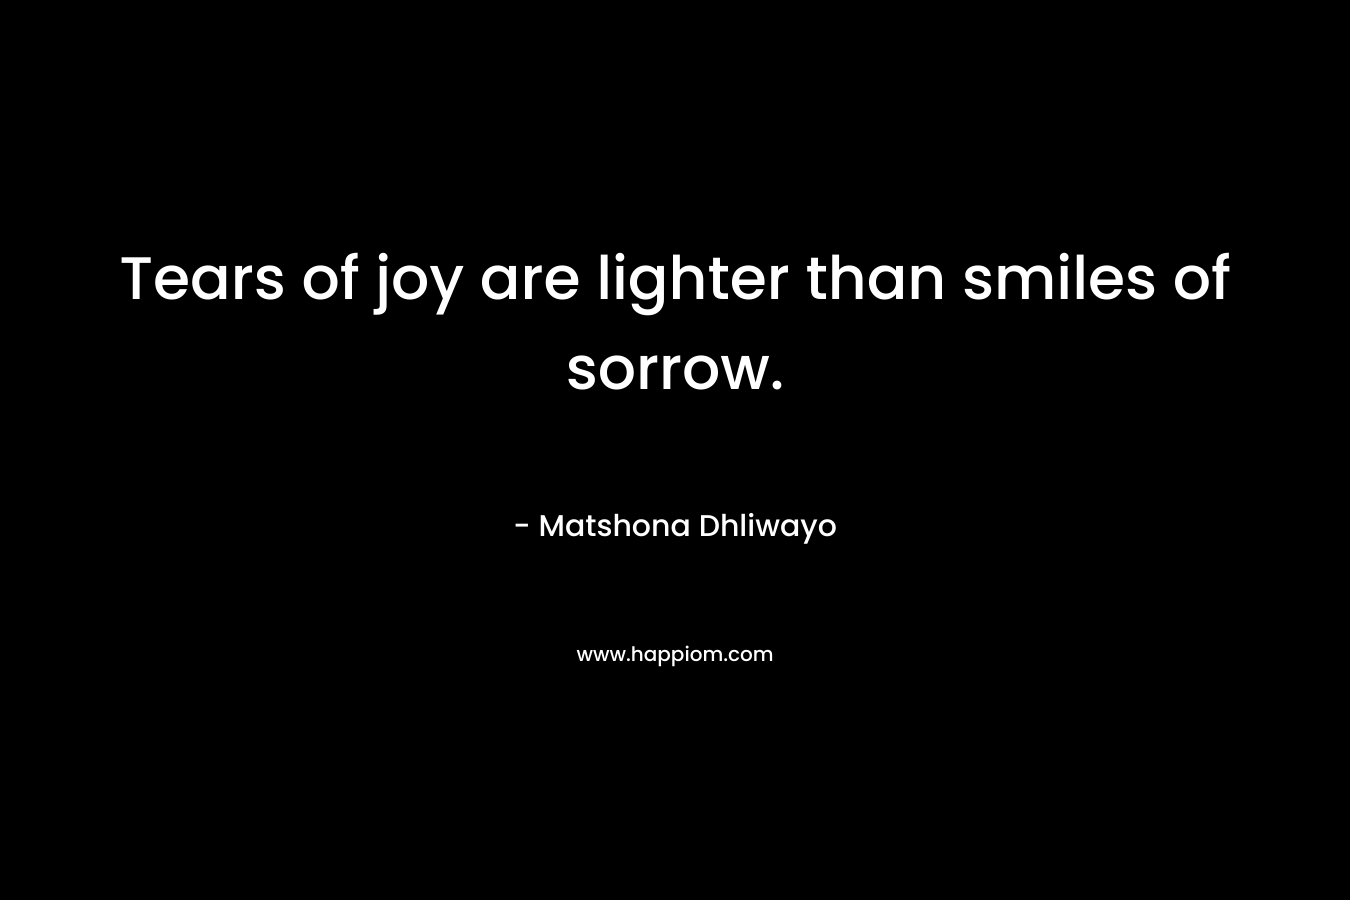 Tears of joy are lighter than smiles of sorrow.